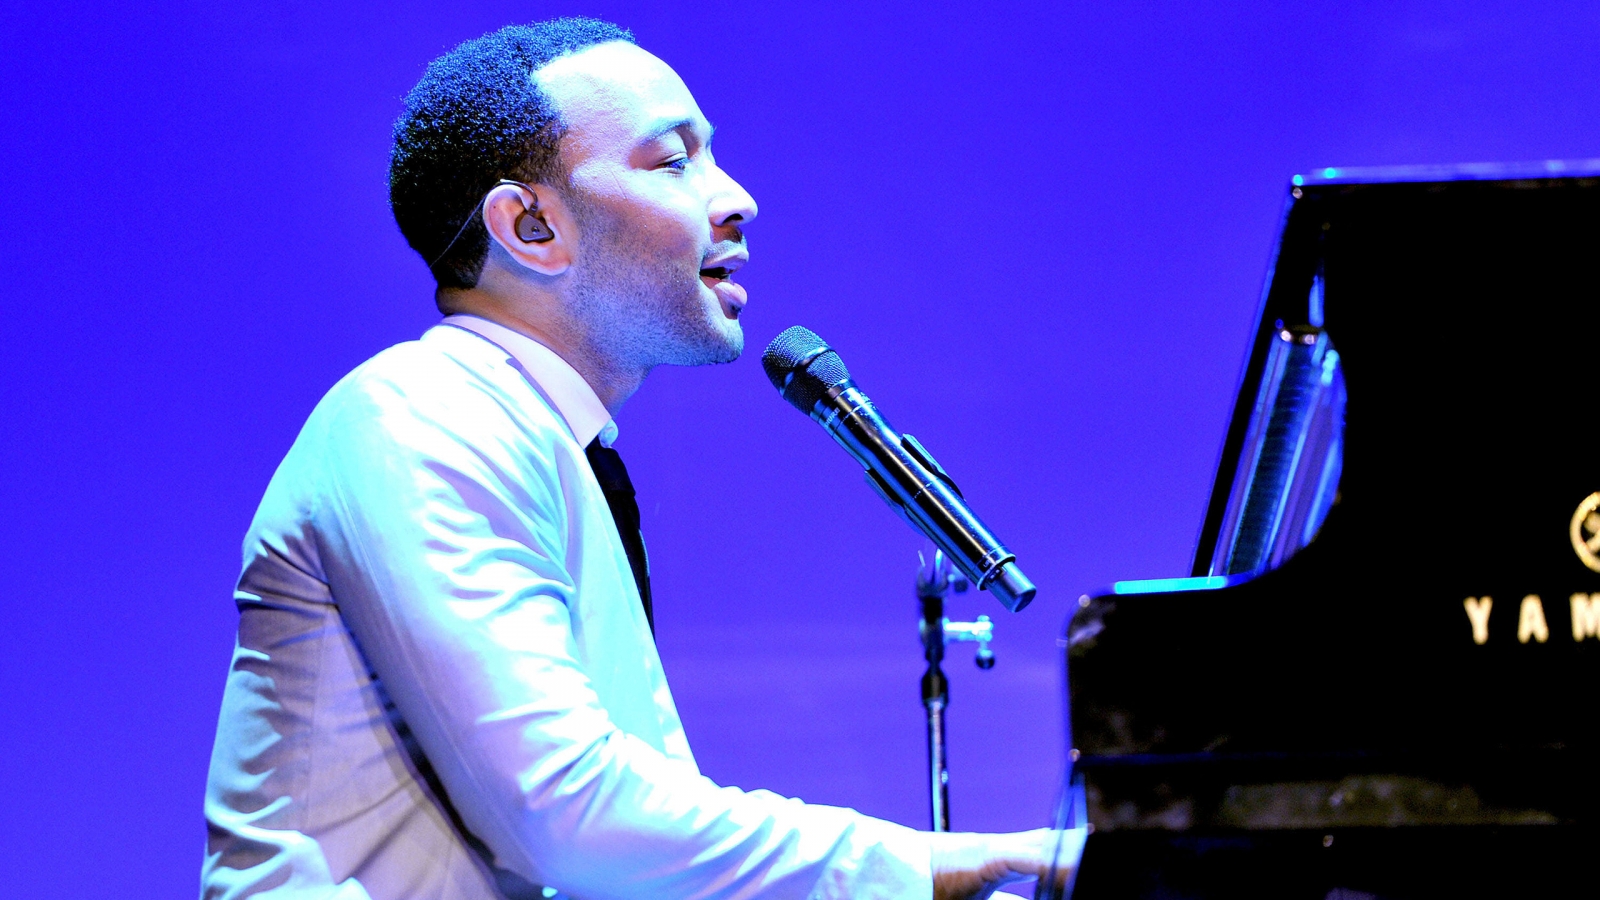 John Legend at Piano for 1600 x 900 HDTV resolution